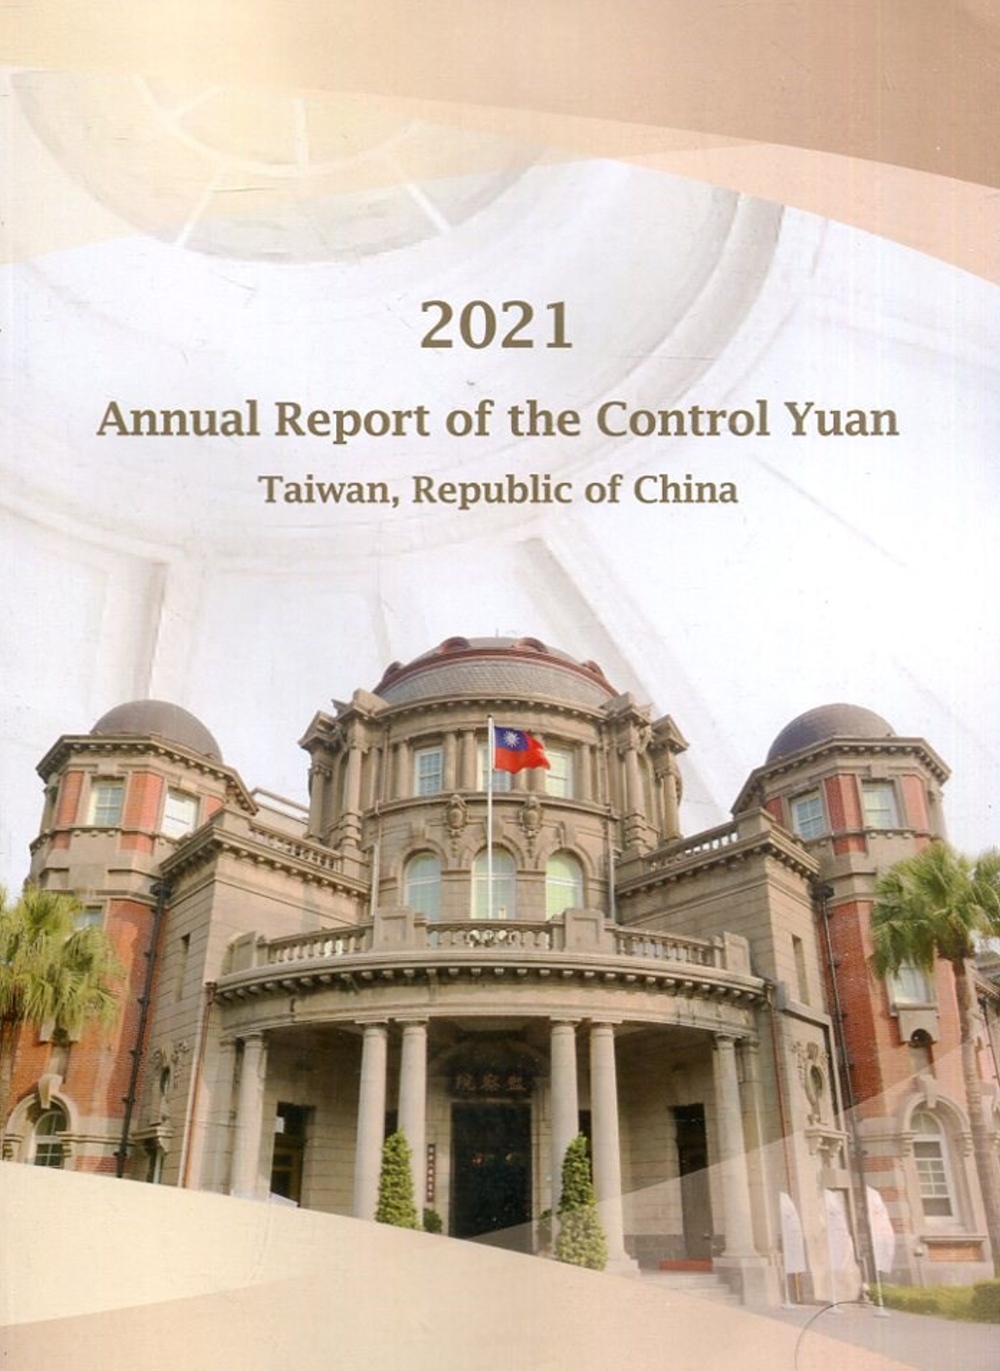 Annual Report of the Control Yuan 2021(2021年監察院年報英文版)